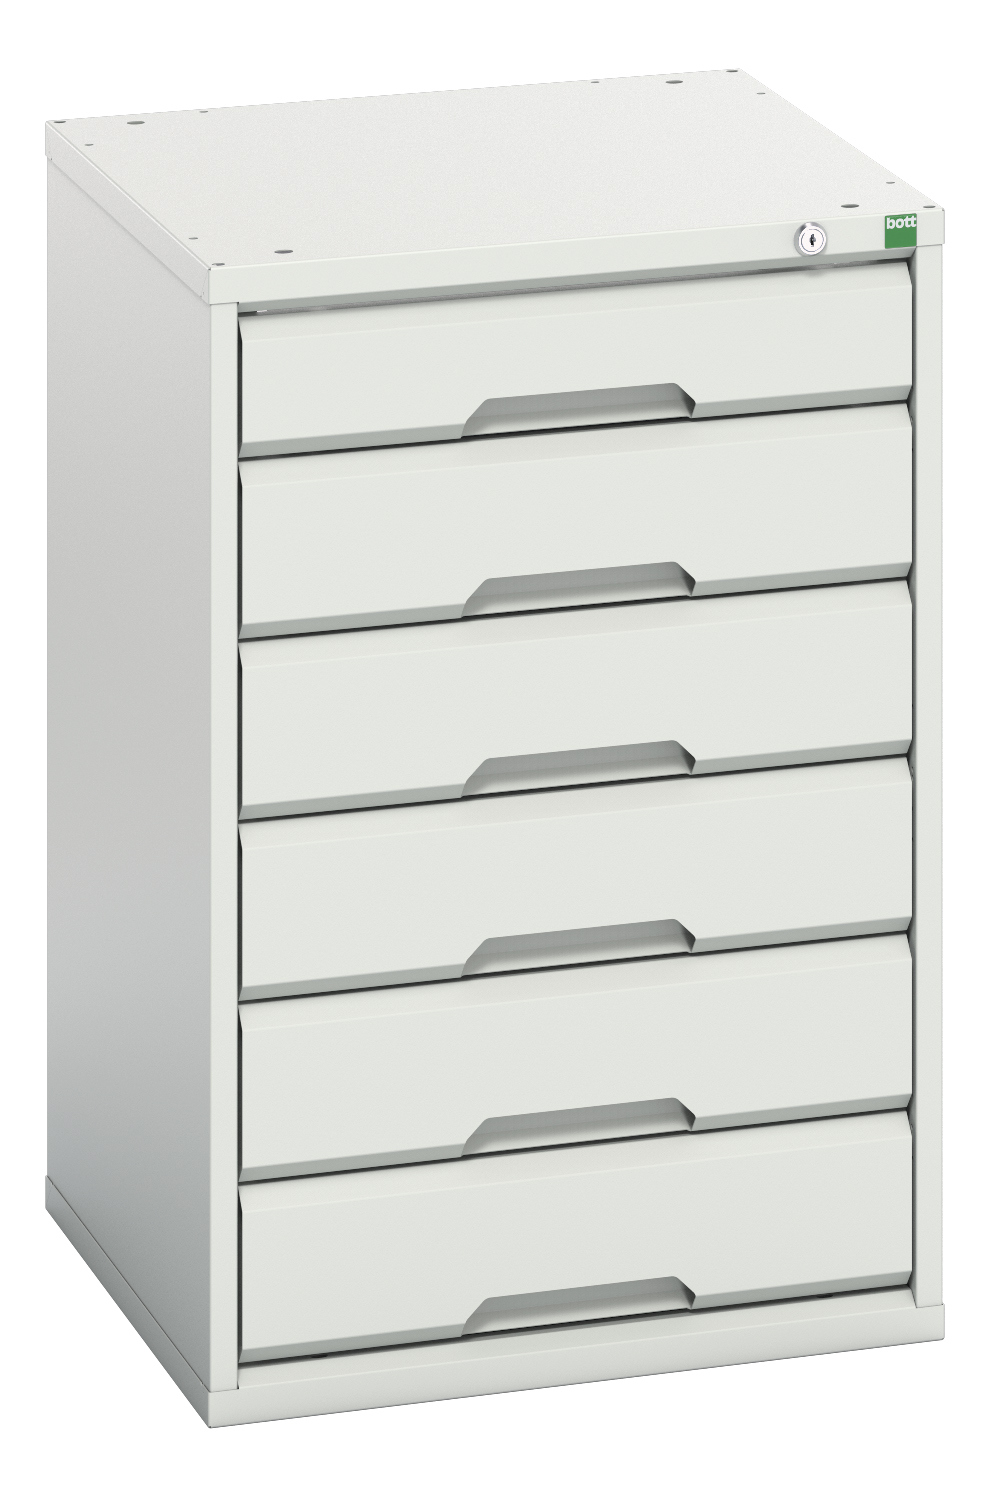 Bott Verso Drawer Cabinet With 6 Drawers - 16925014.16